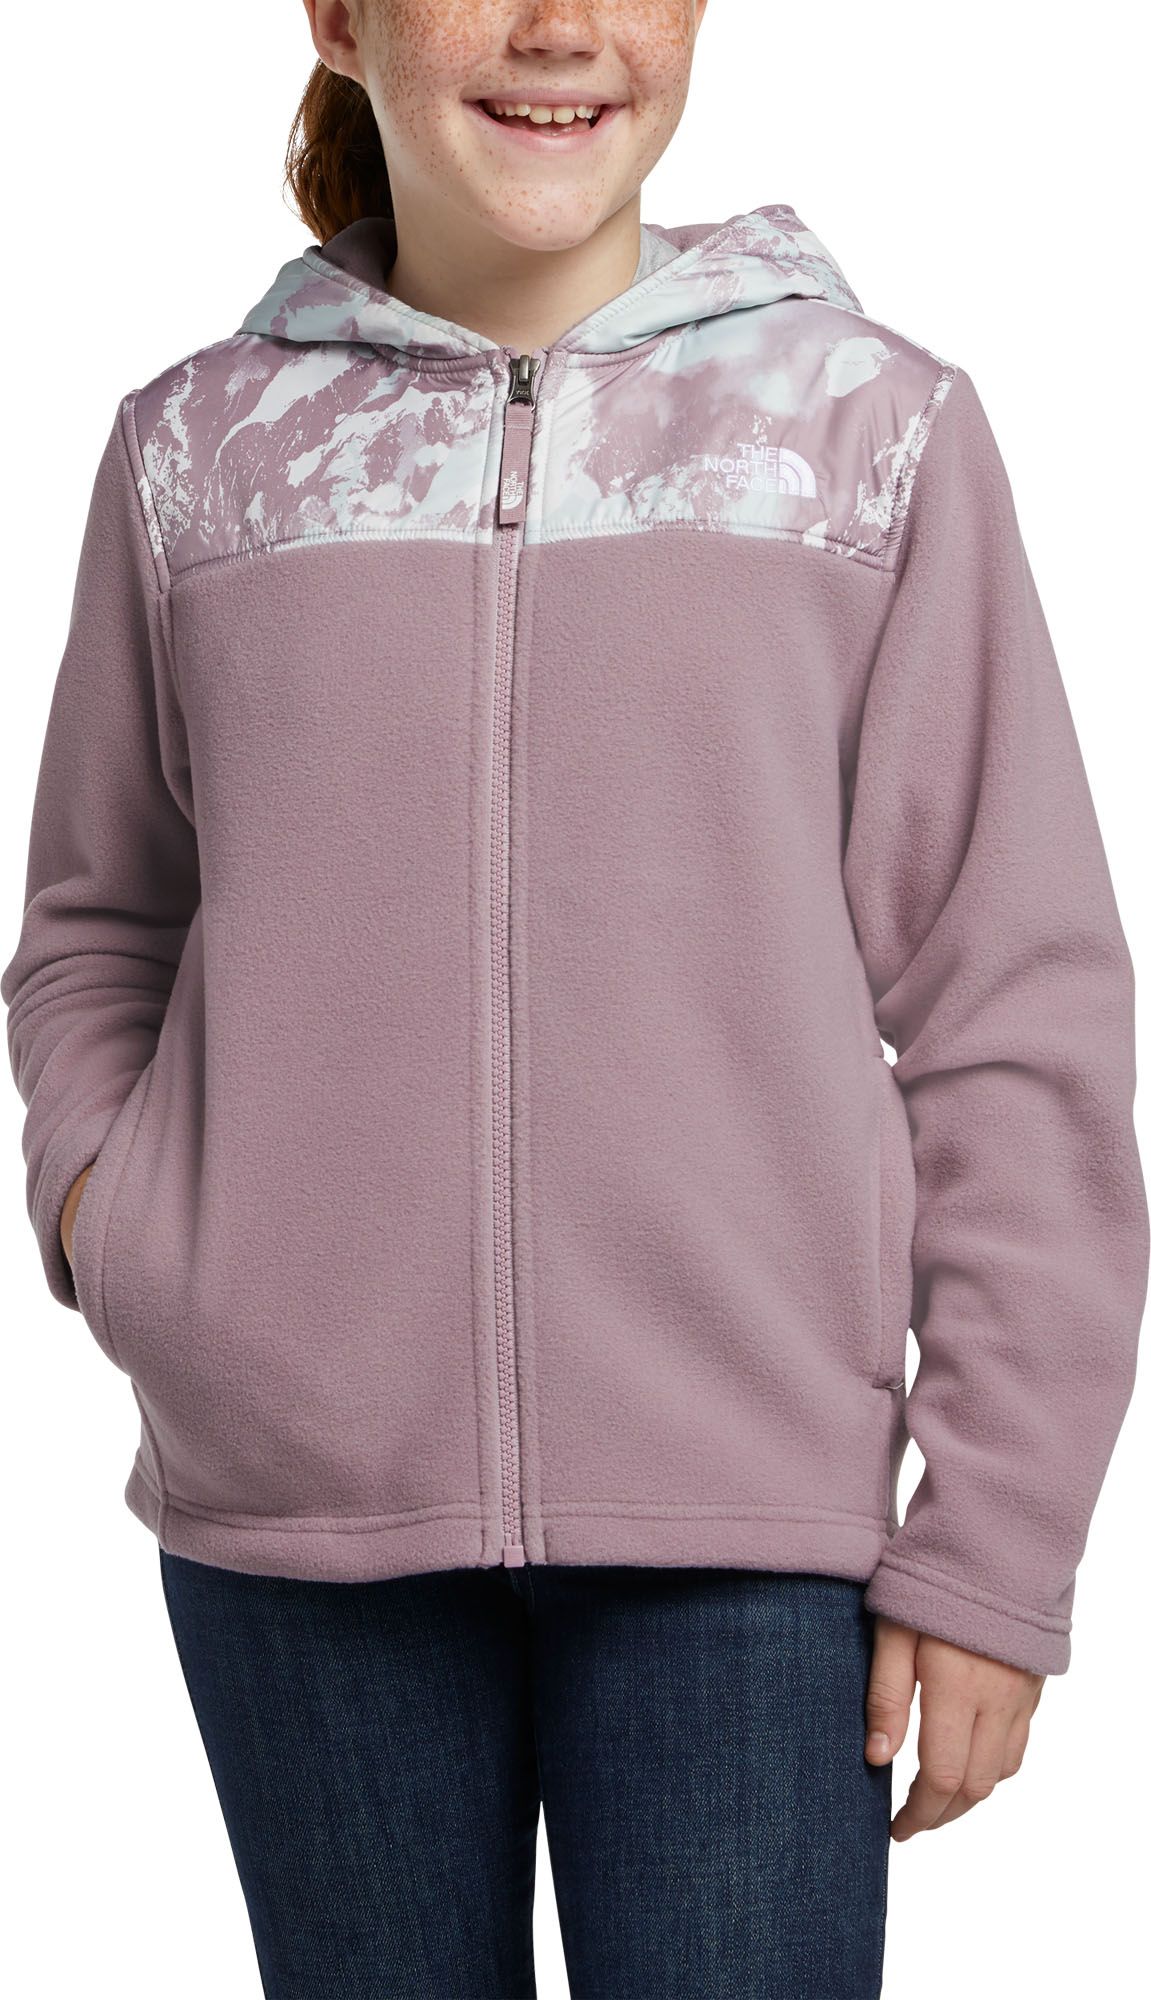 the north face girls hoodie